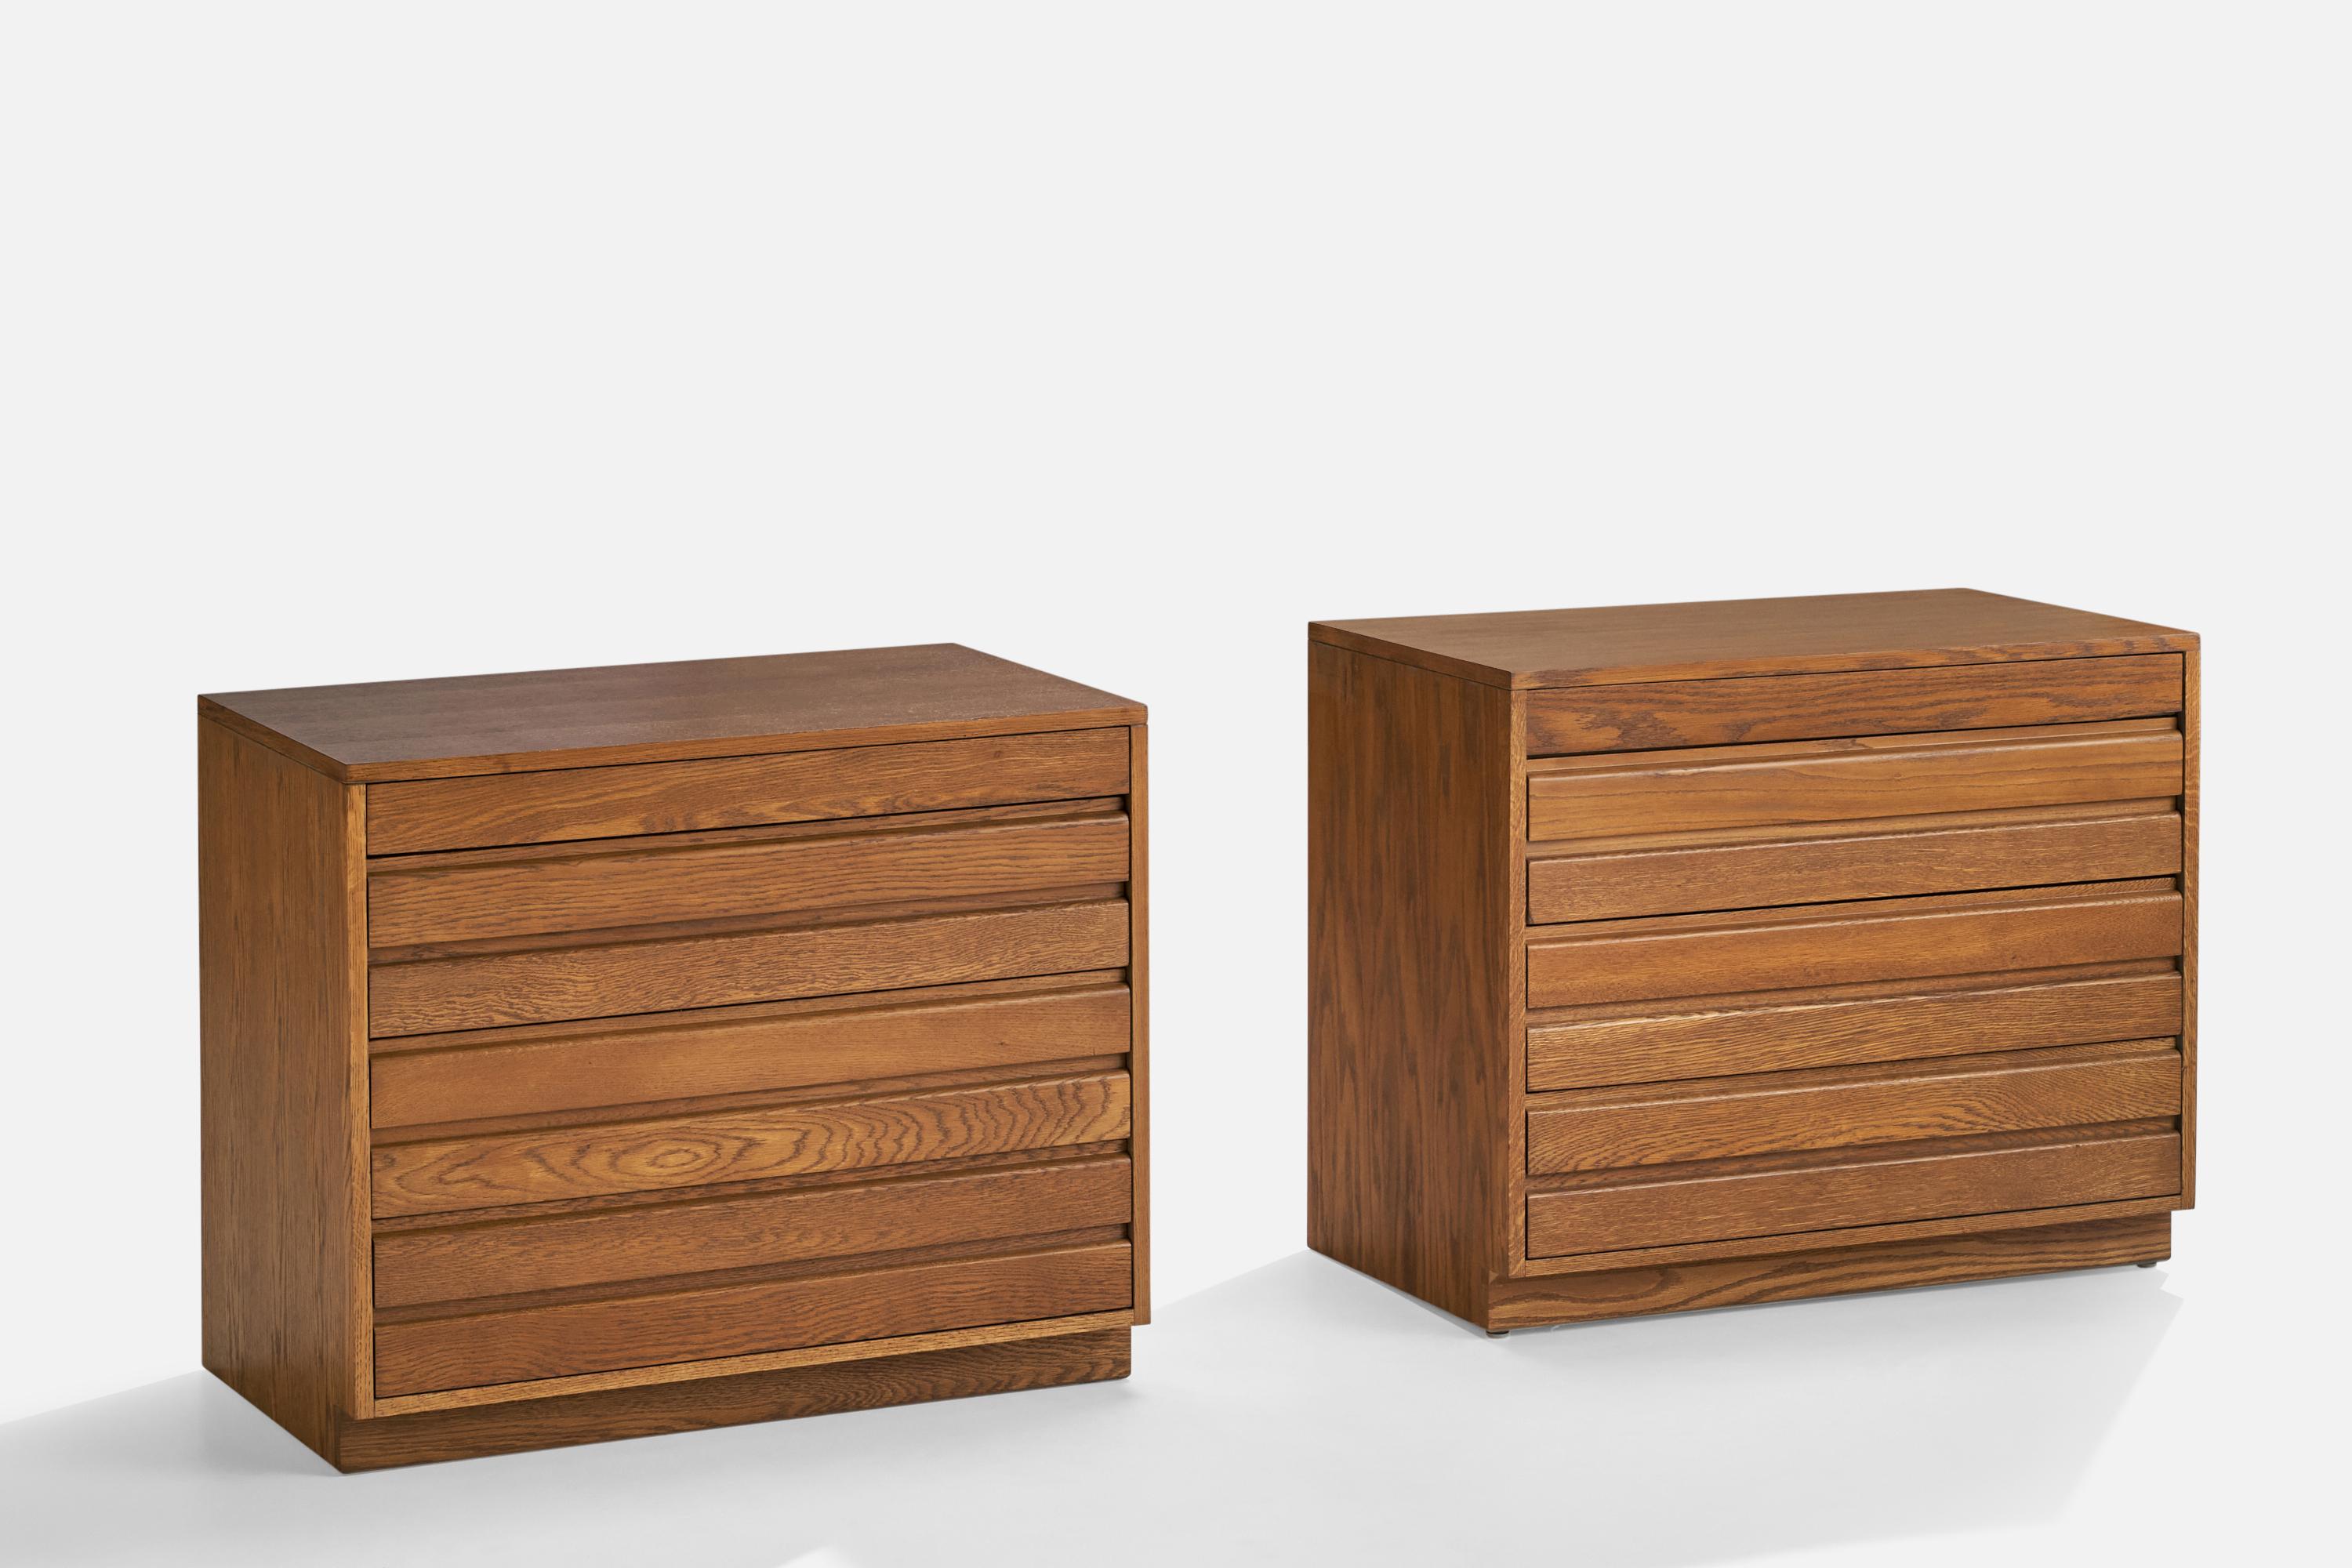 A pair of solid oak chests of drawers designed and produced by Sligh Furniture, US, 1950s.